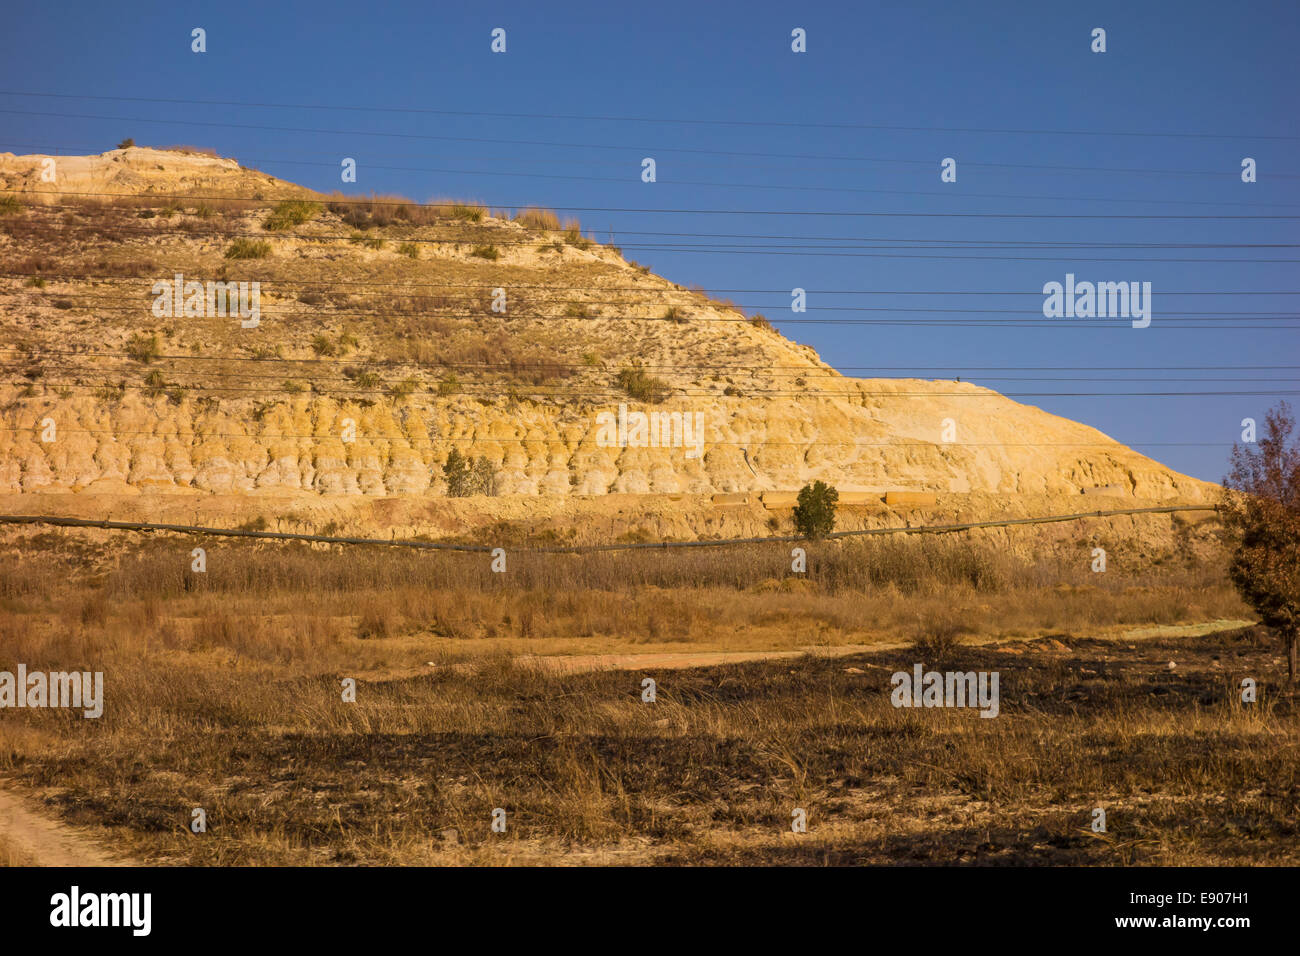 JOHANNESBURG, SOUTH AFRICA - Mountain of gold mine tailings. Stock Photo